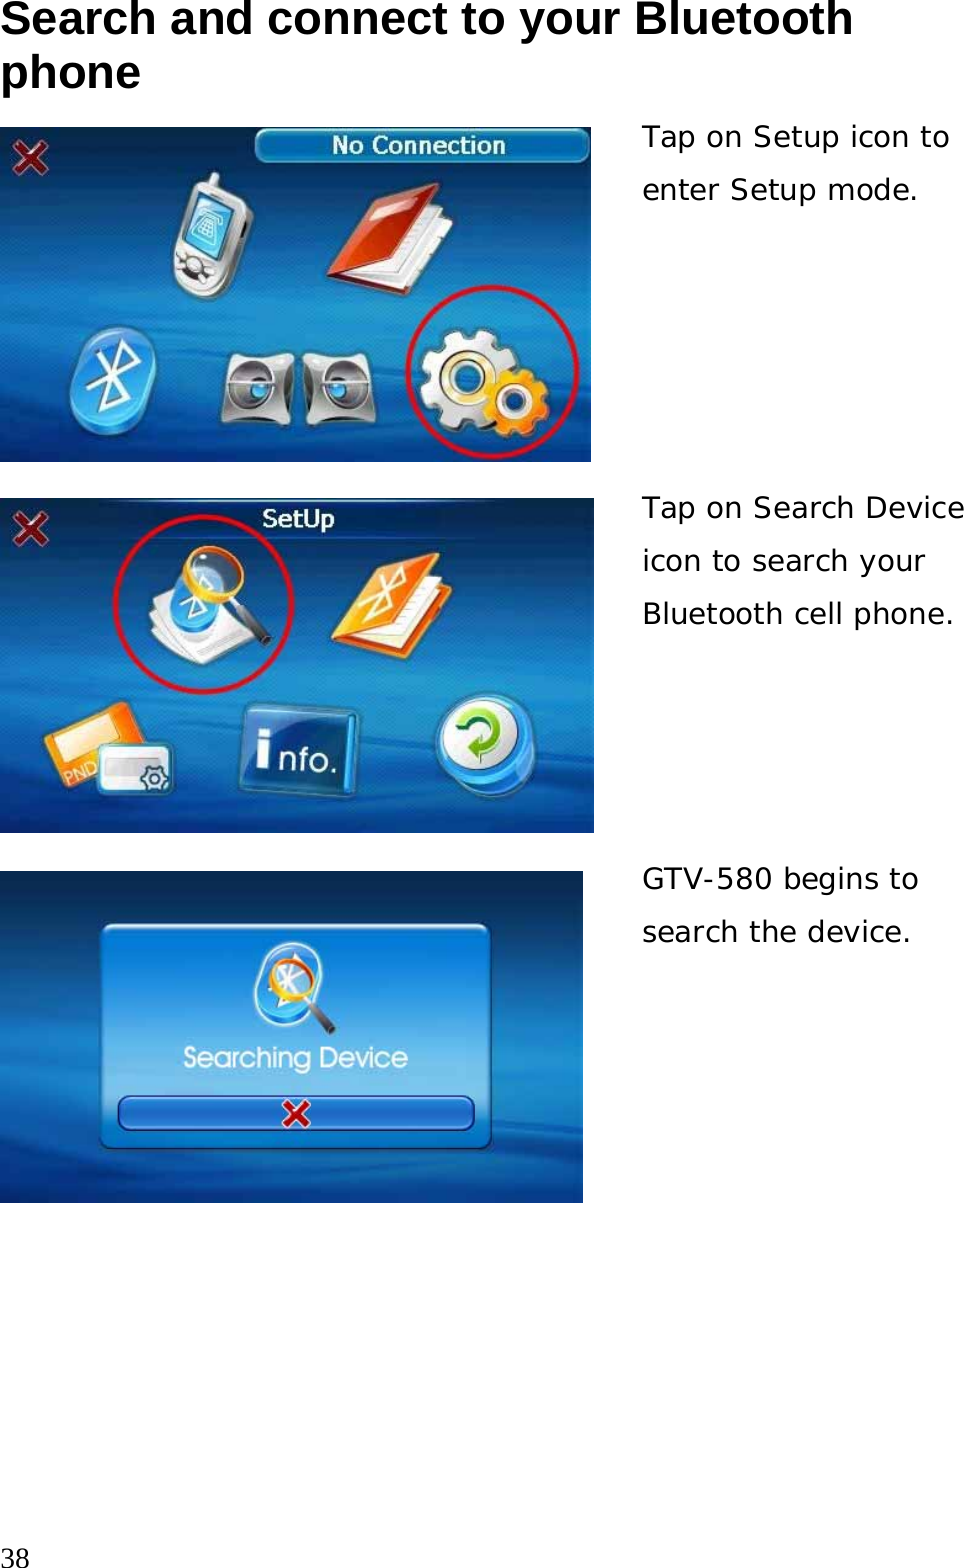  38 Search and connect to your Bluetooth phone  Tap on Setup icon to enter Setup mode. Tap on Search Device icon to search your Bluetooth cell phone.  GTV-580 begins to search the device. 